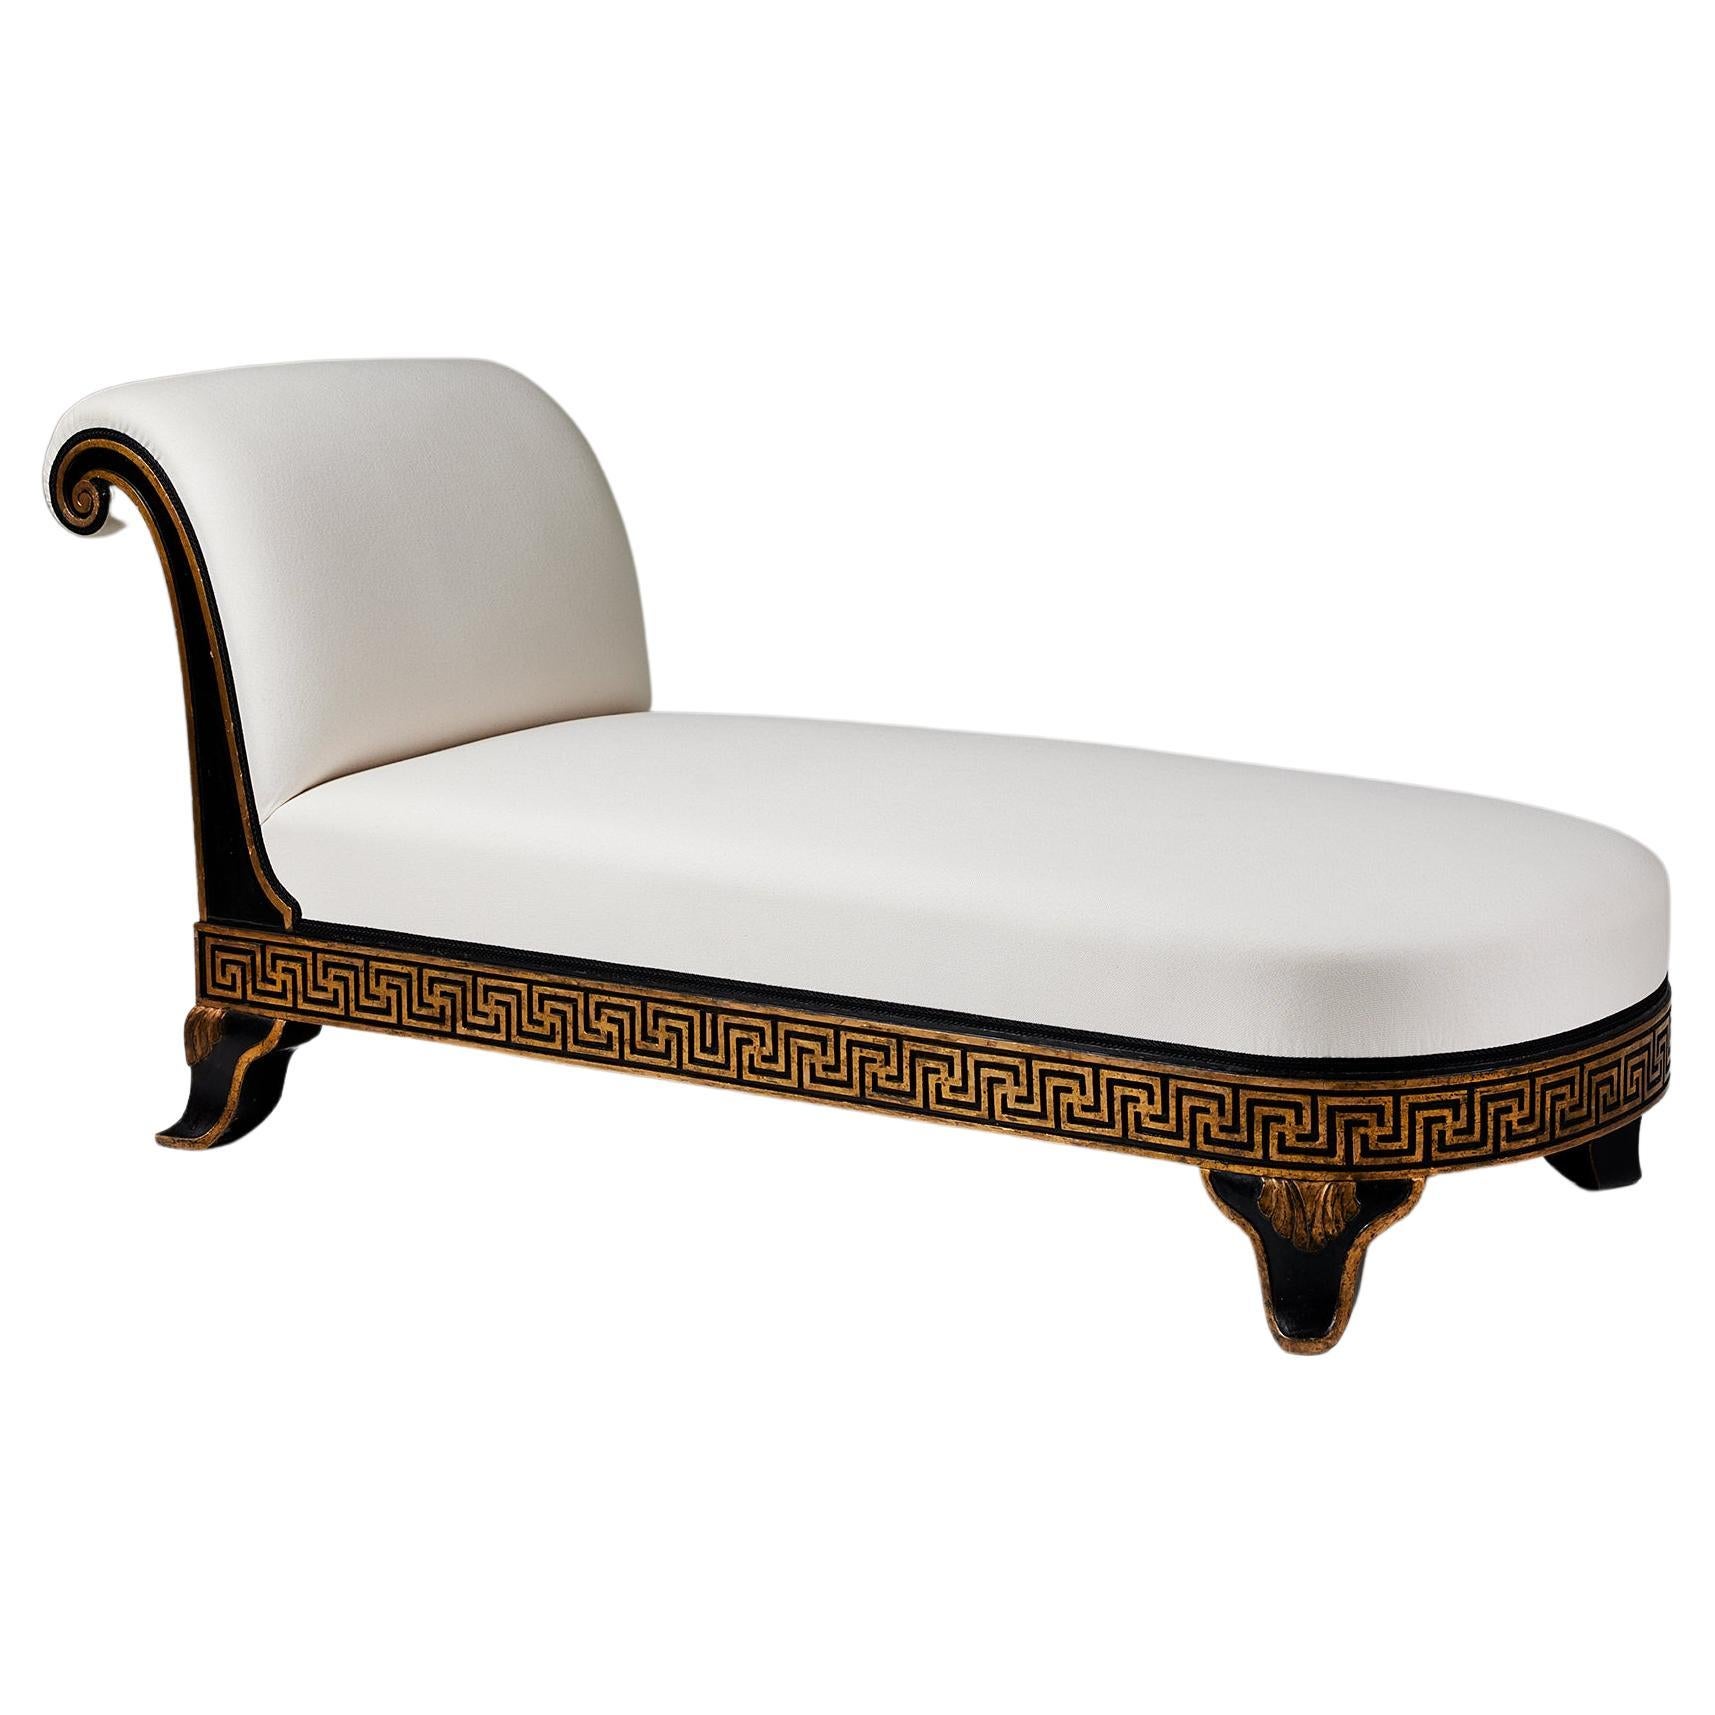 Chaise longue, anonymous for Louis G Thiersen, Denmark, 1928 For Sale